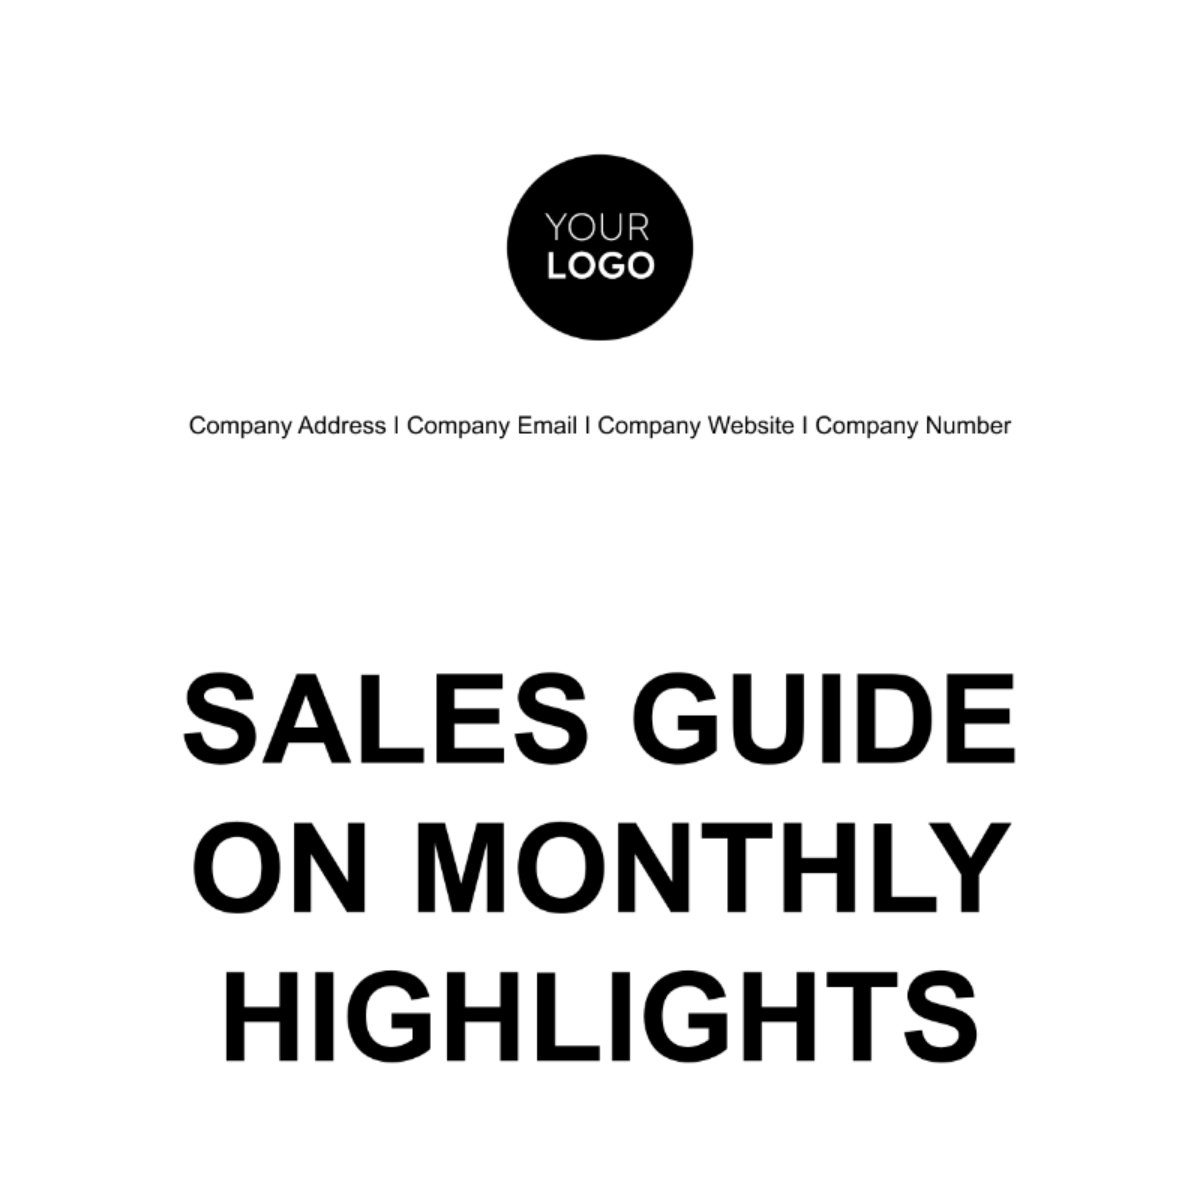 Sales Guide on Monthly Highlights Template